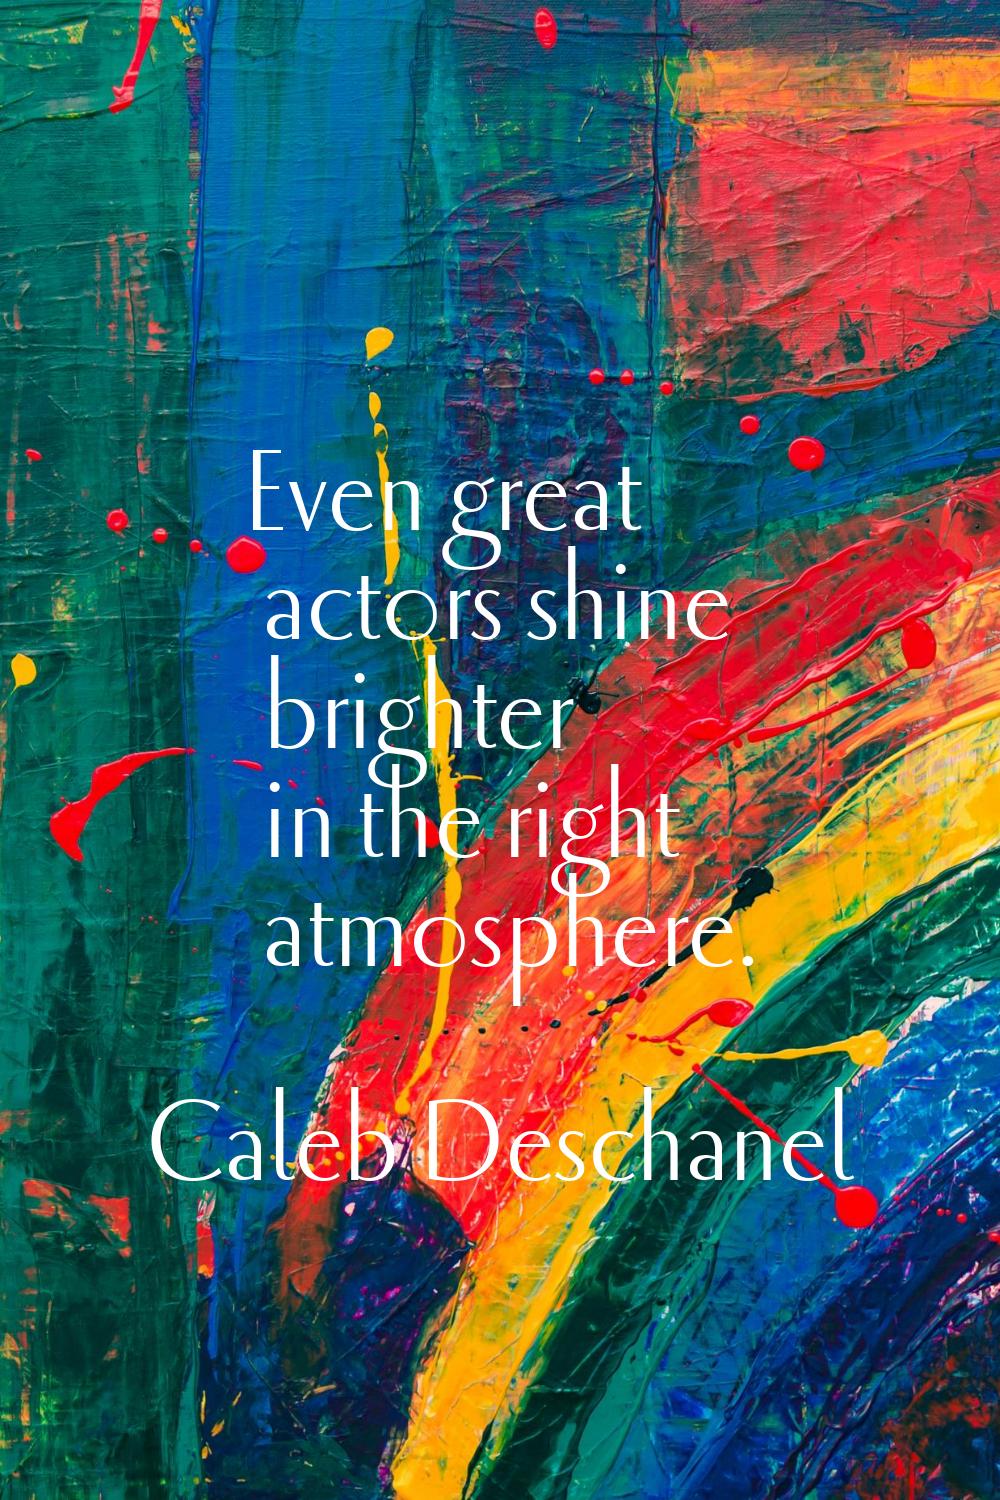 Even great actors shine brighter in the right atmosphere.